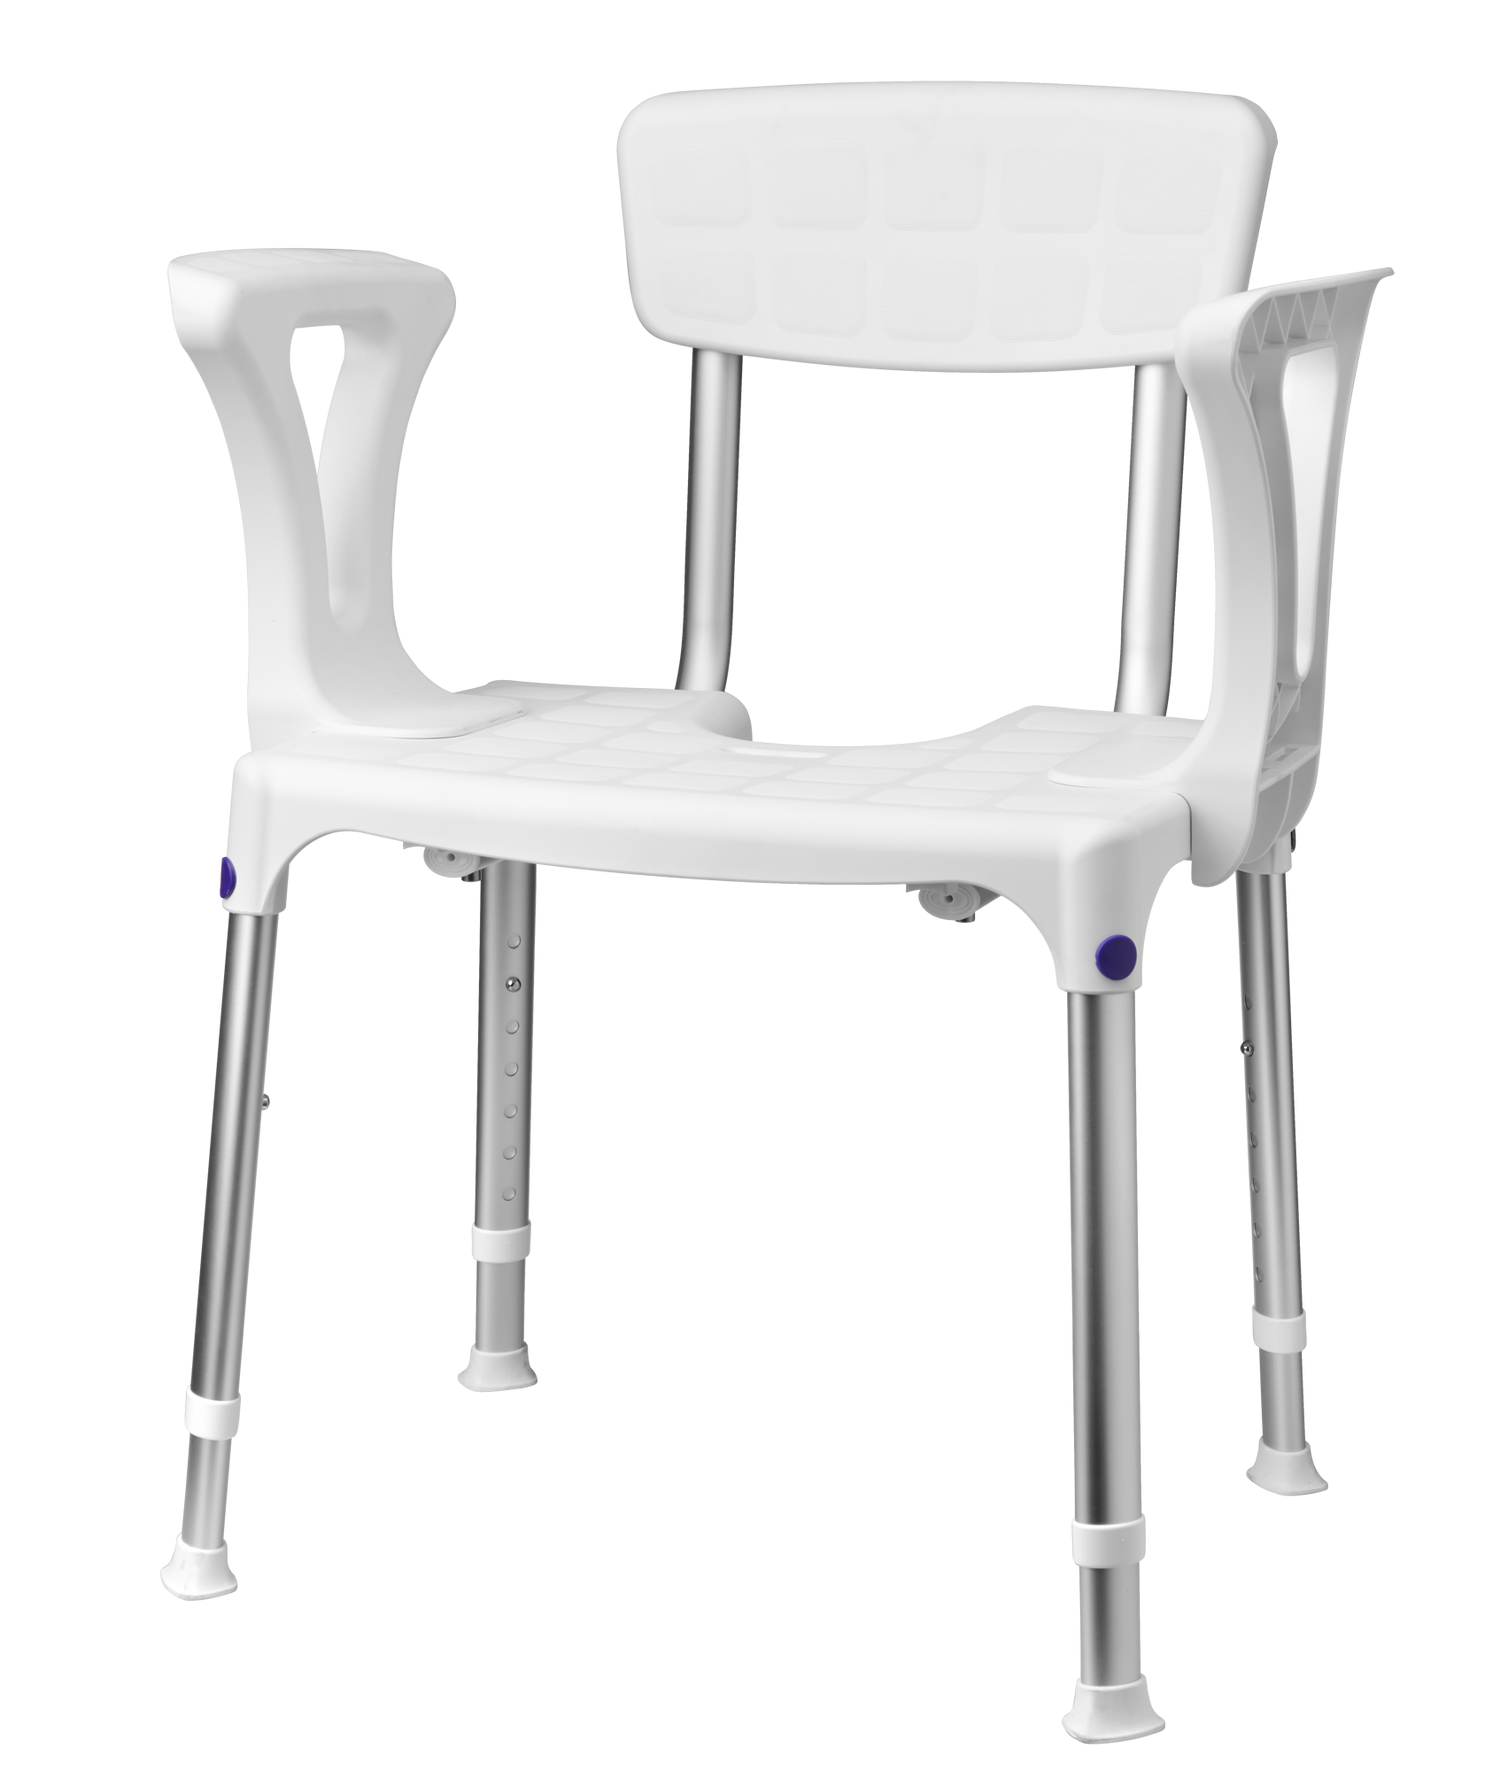 SecuCare Quattro Showerchair with hygiene cutout, backrest and armrests